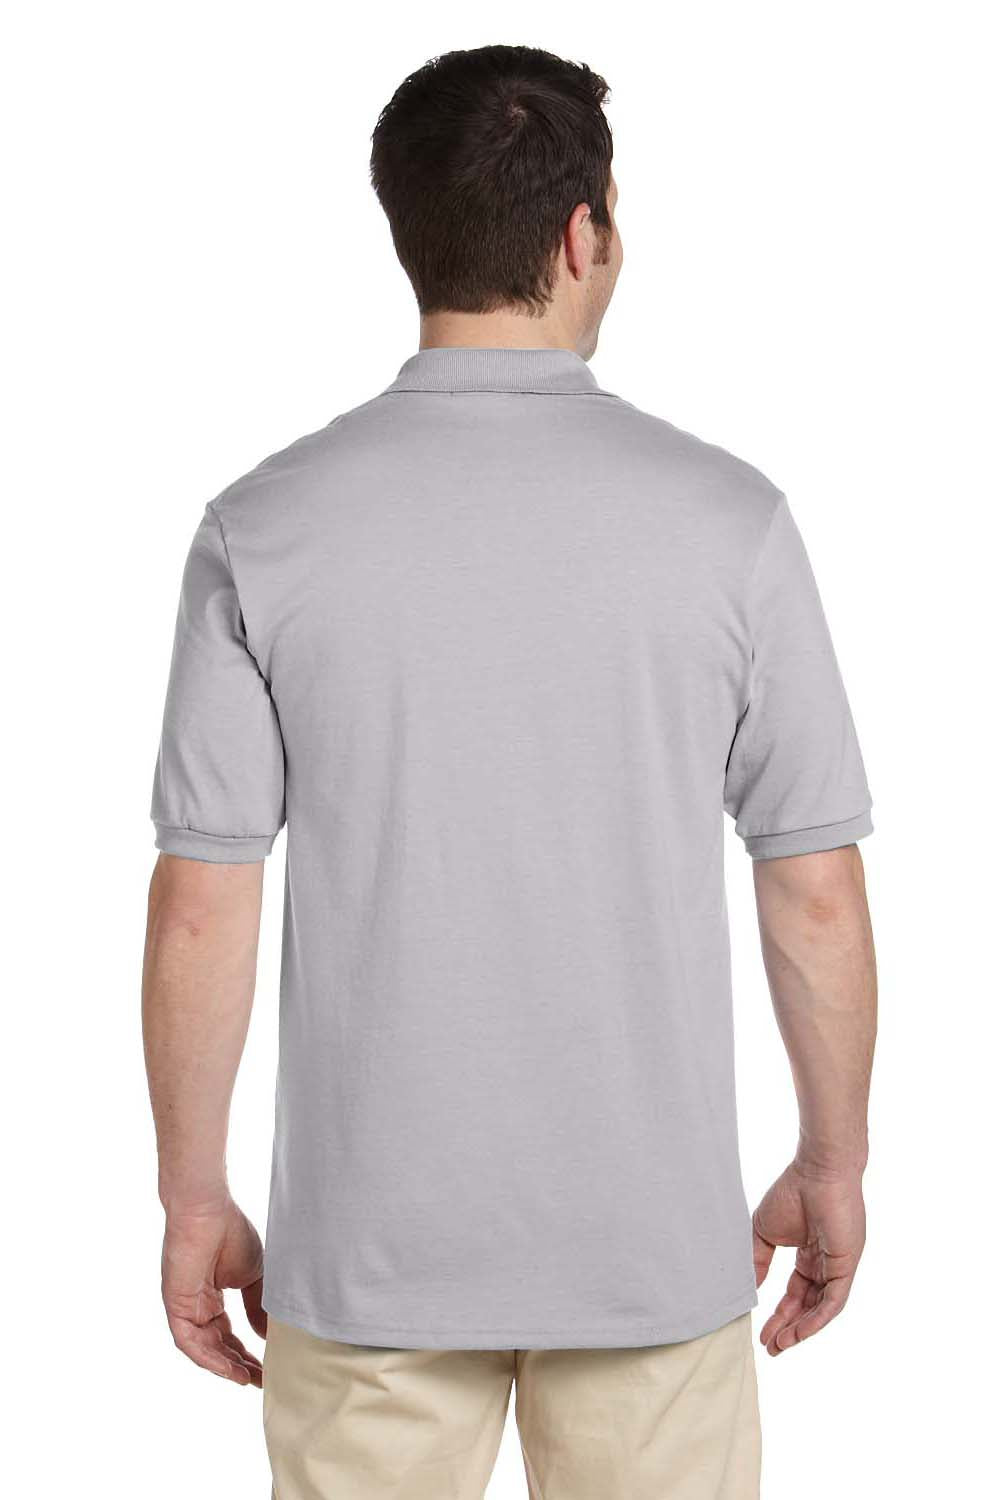 Jerzees 437 Mens SpotShield Stain Resistant Short Sleeve Polo Shirt Silver Grey Back